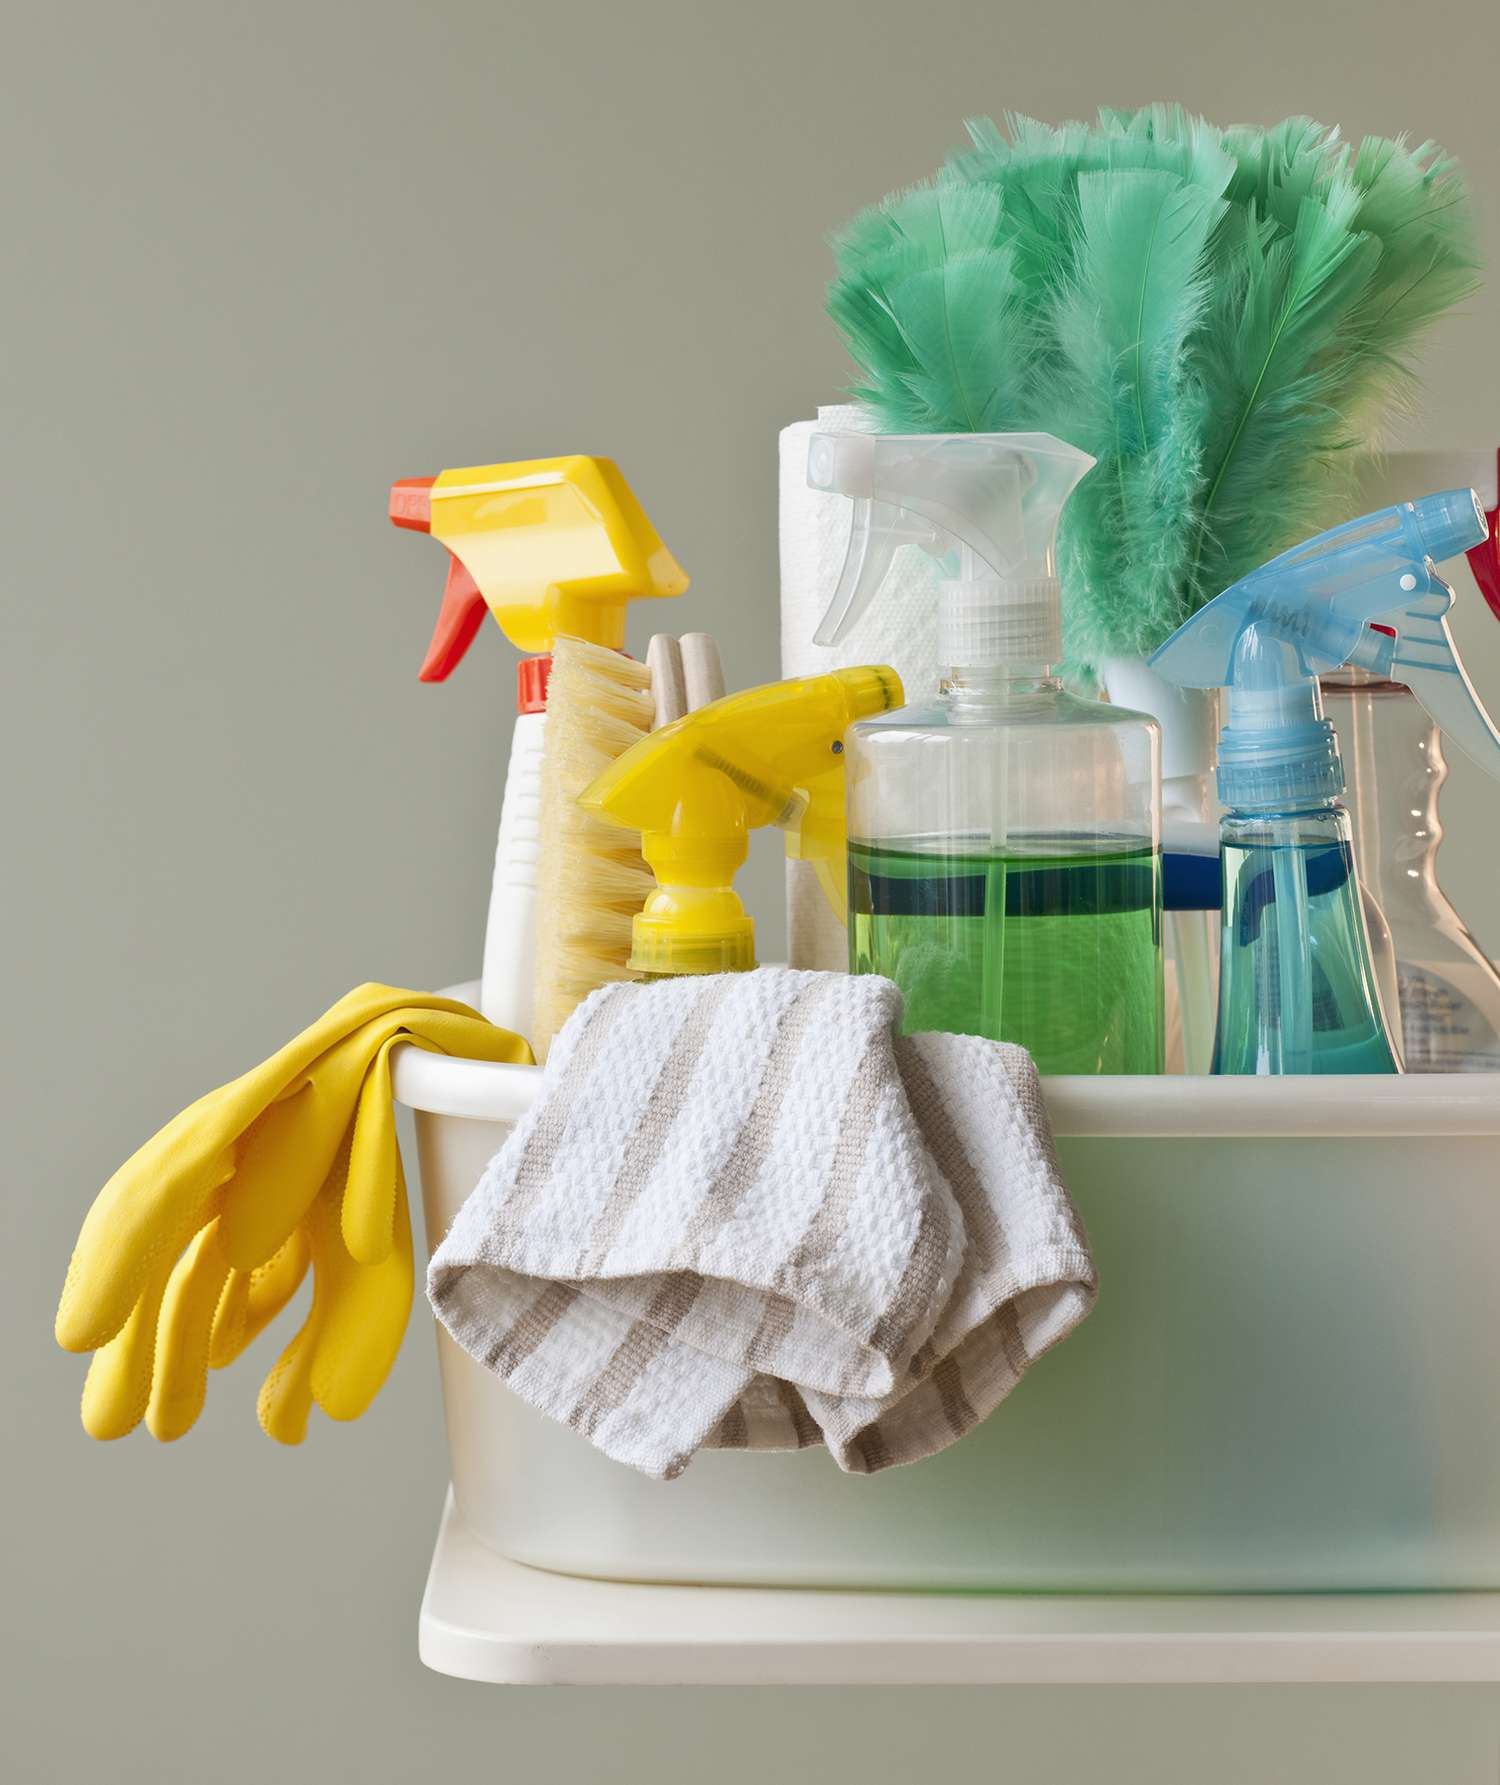 Cleaning supplies and dish towel